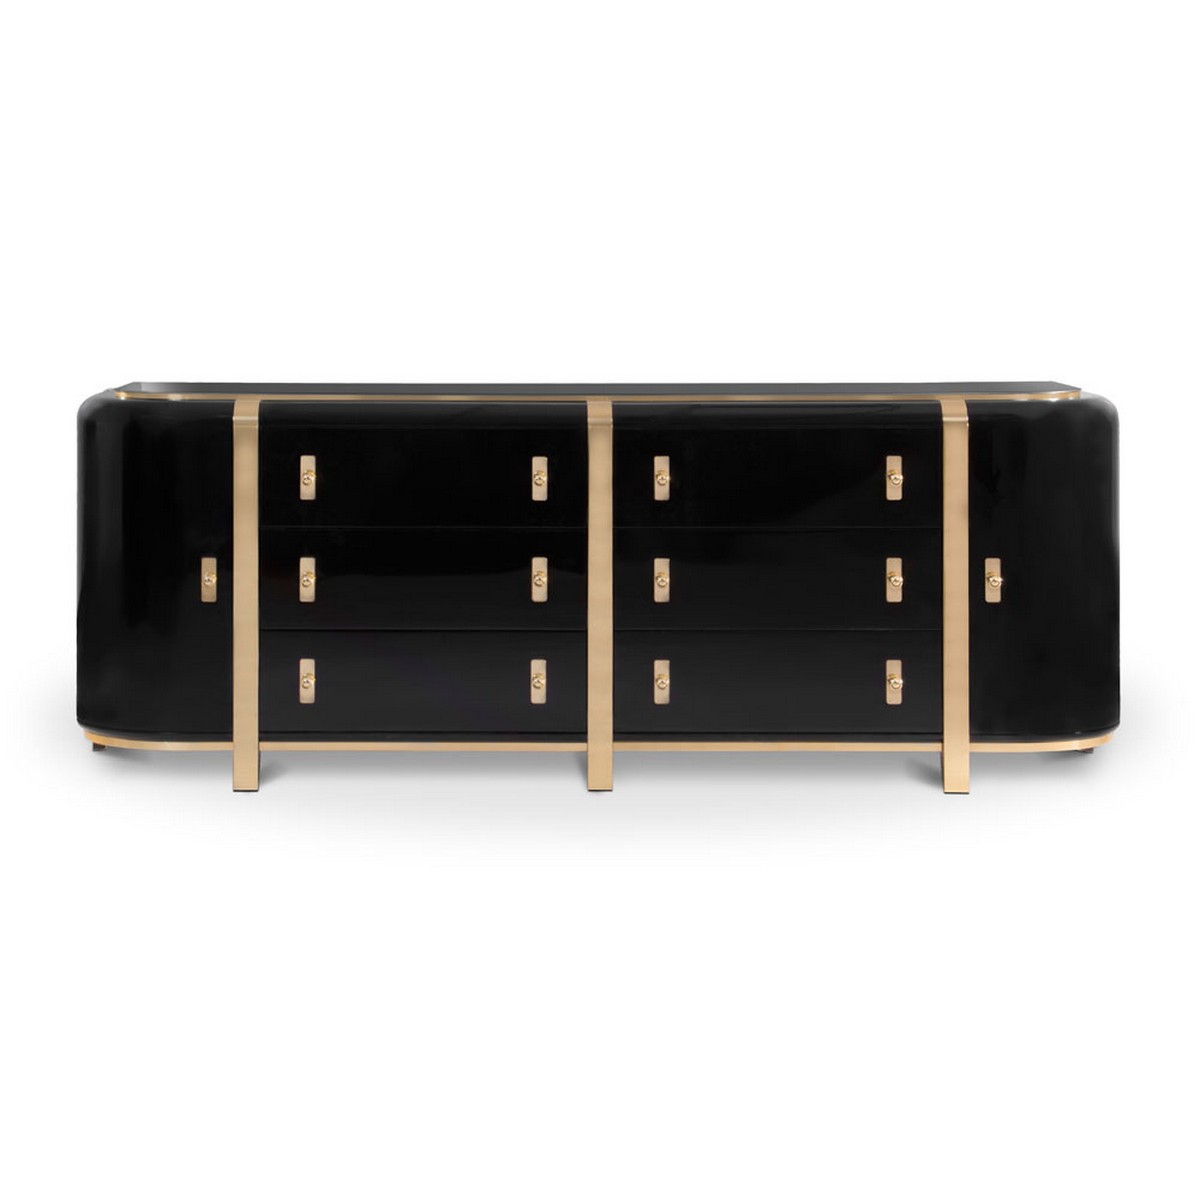 Covet Outlet: New Sideboard Entries